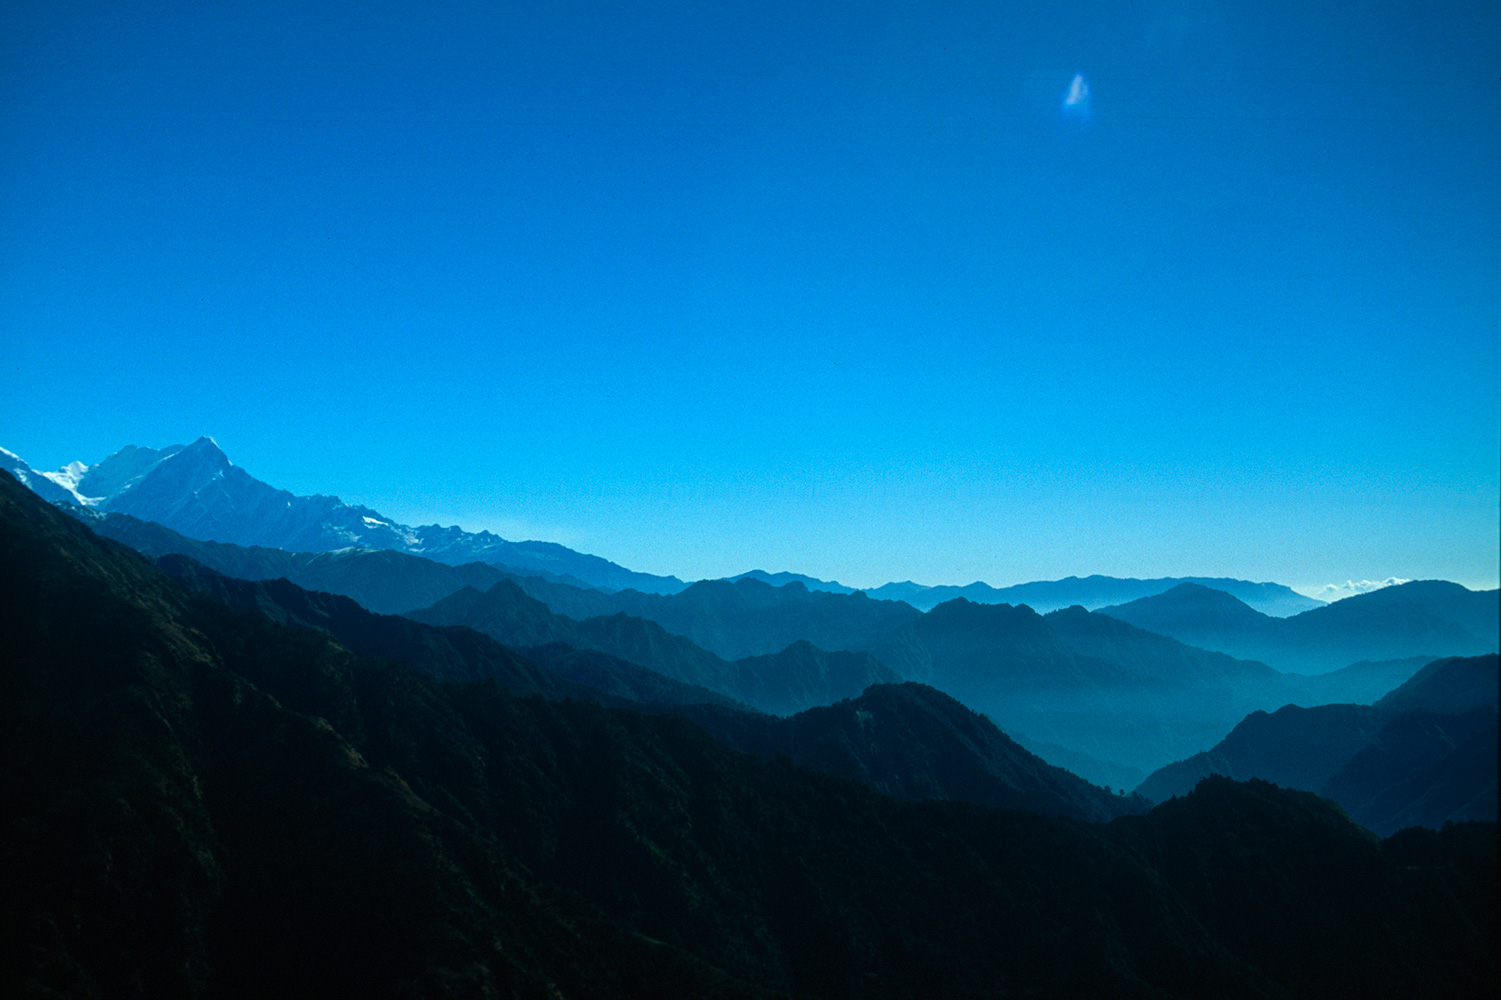 The Dhaulagiri Himal is a huge massif, and this pass lies at its western end, beneath the Gurja Himal. This is a view along the southern slopes, with the Annapurna Himal rising in the distance on the left.Nikon Fm2, 105mm, Fuji Velvia